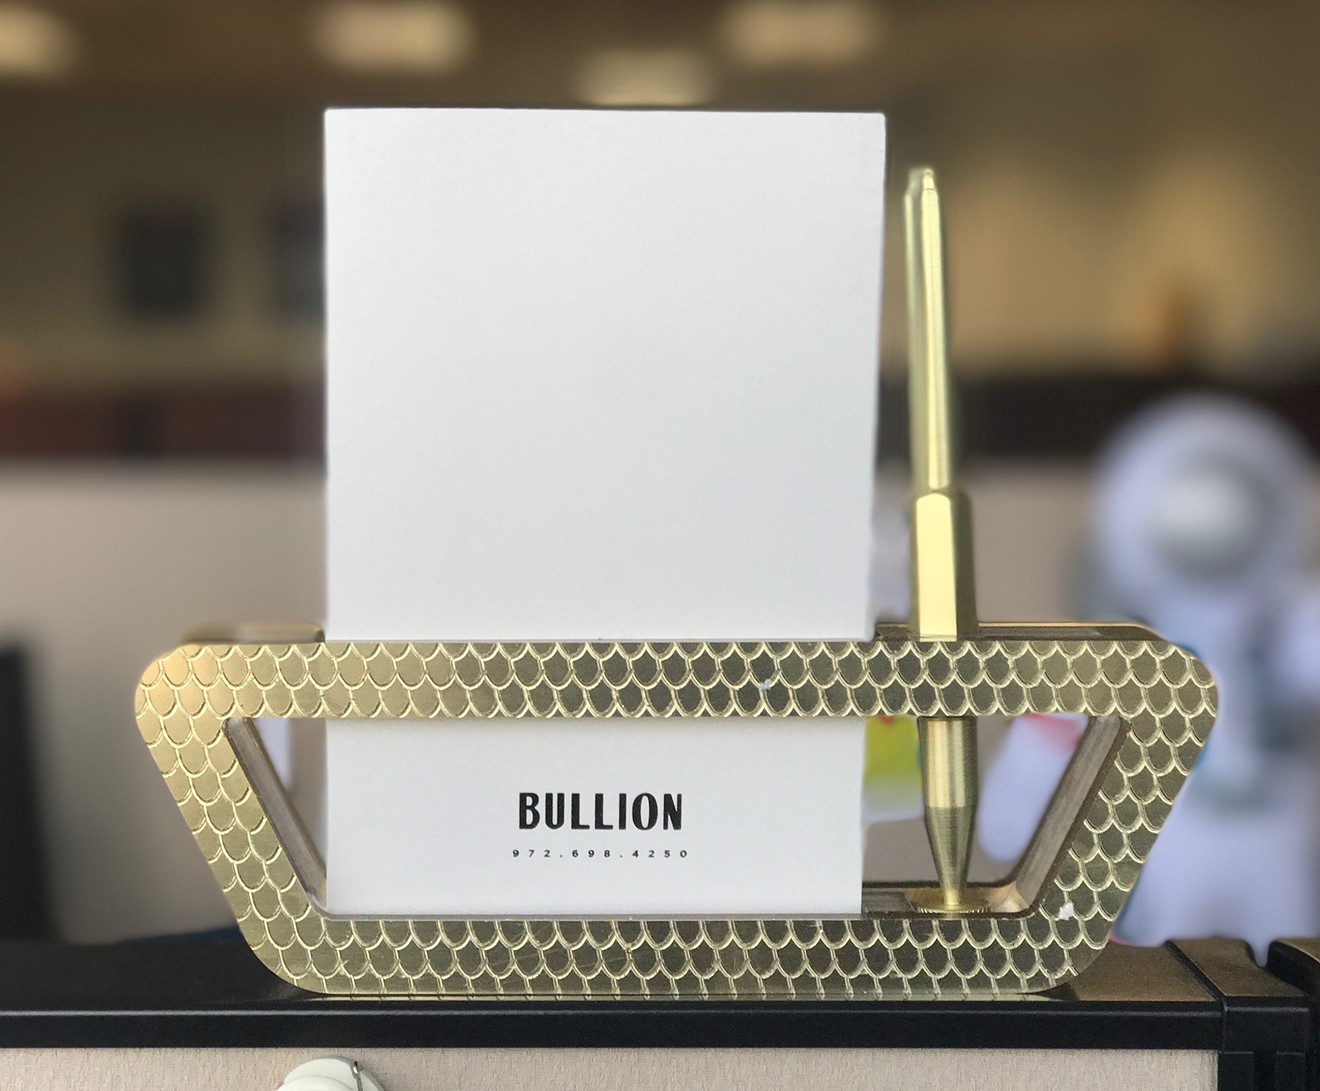 A little research shows that the pen alone in this branded stationery set from Bullion retails for $50.